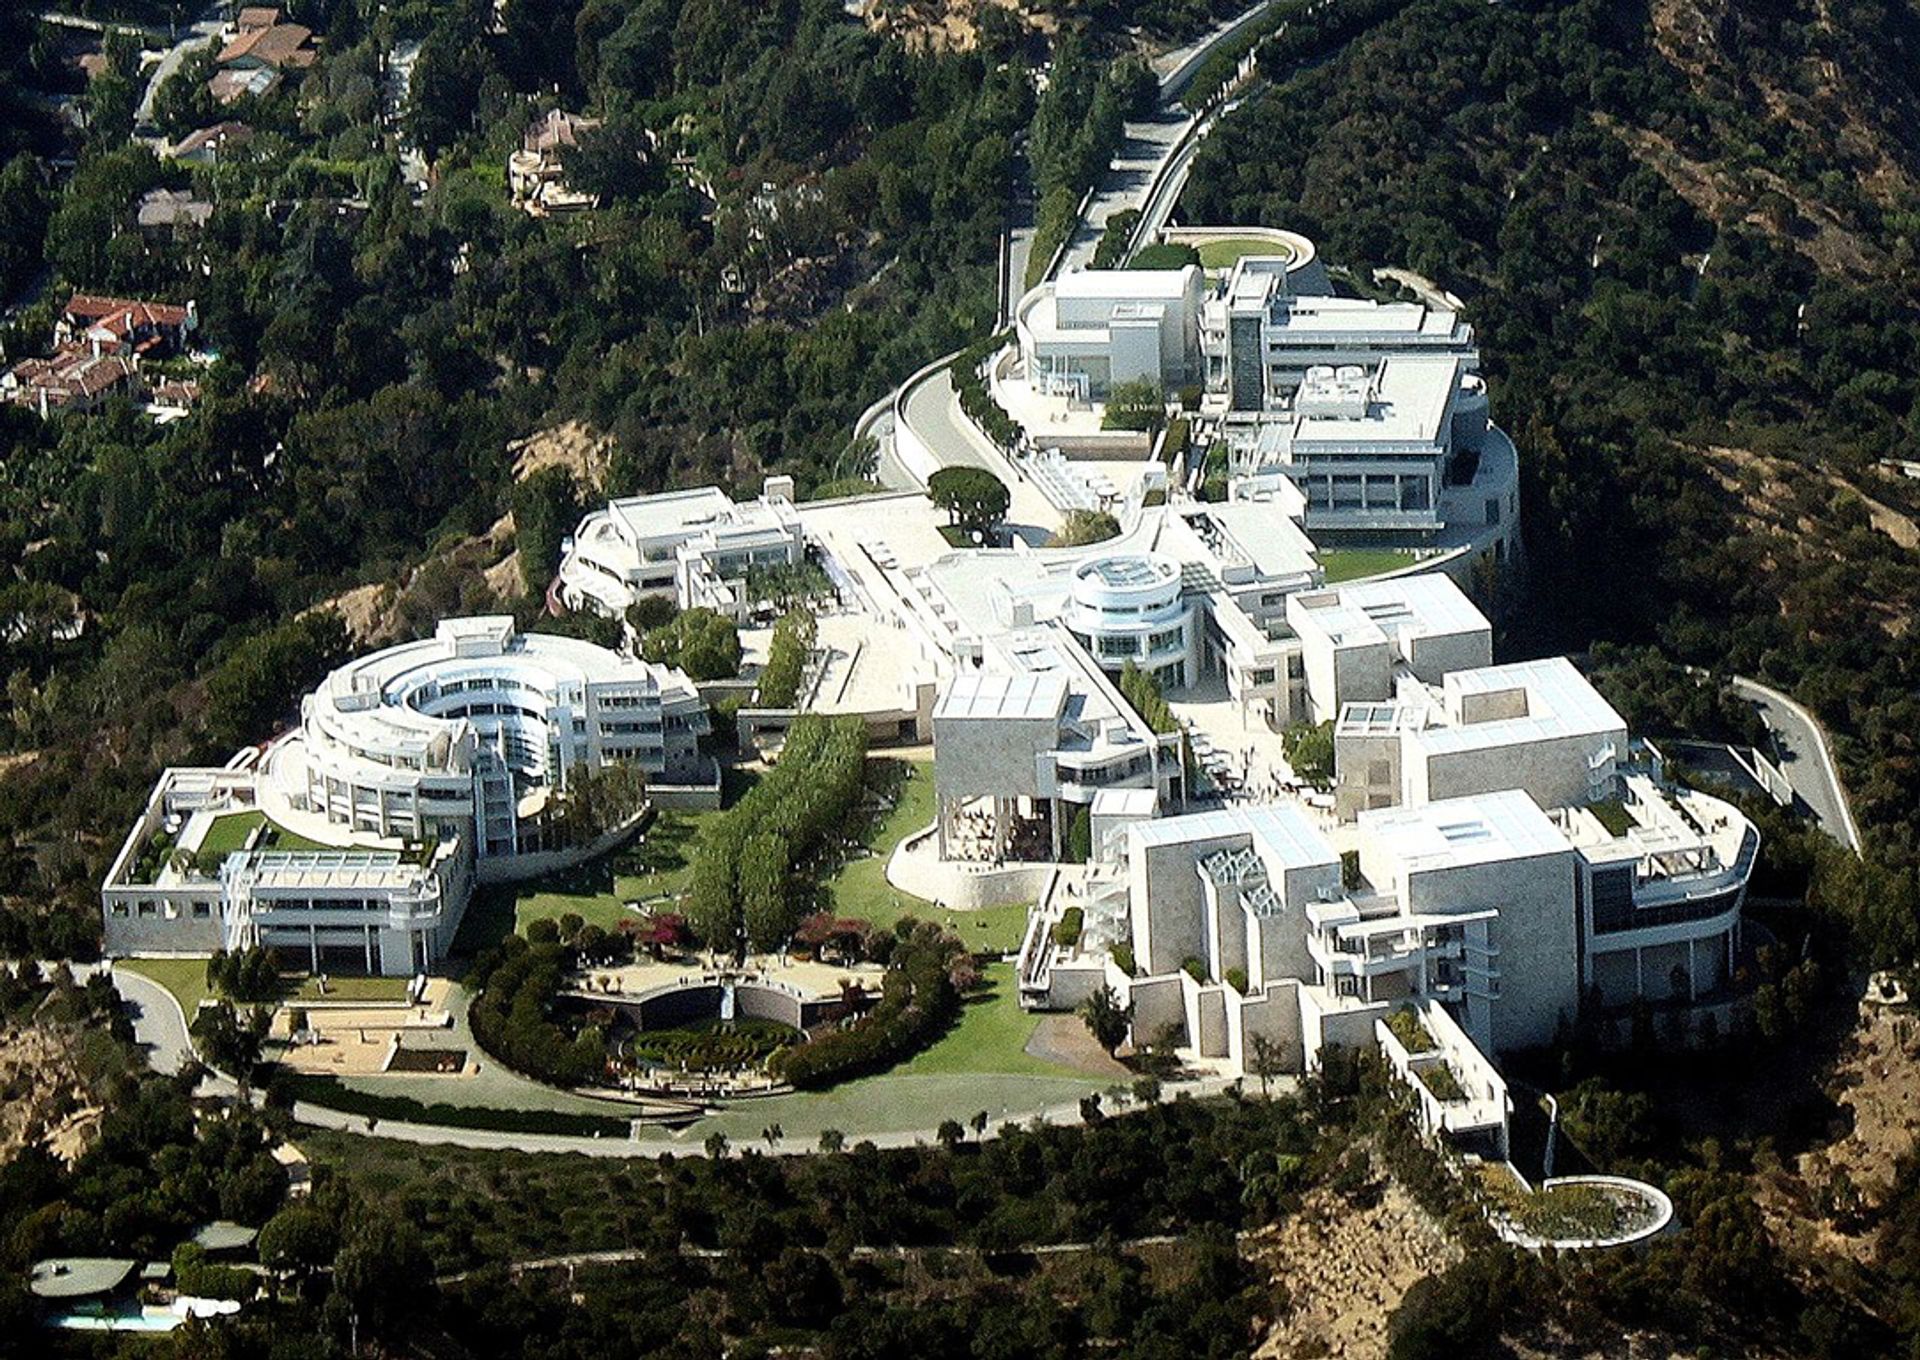 The Getty Center remains open amid a declaration of a state of emergency by the state of California and Los Angeles County 